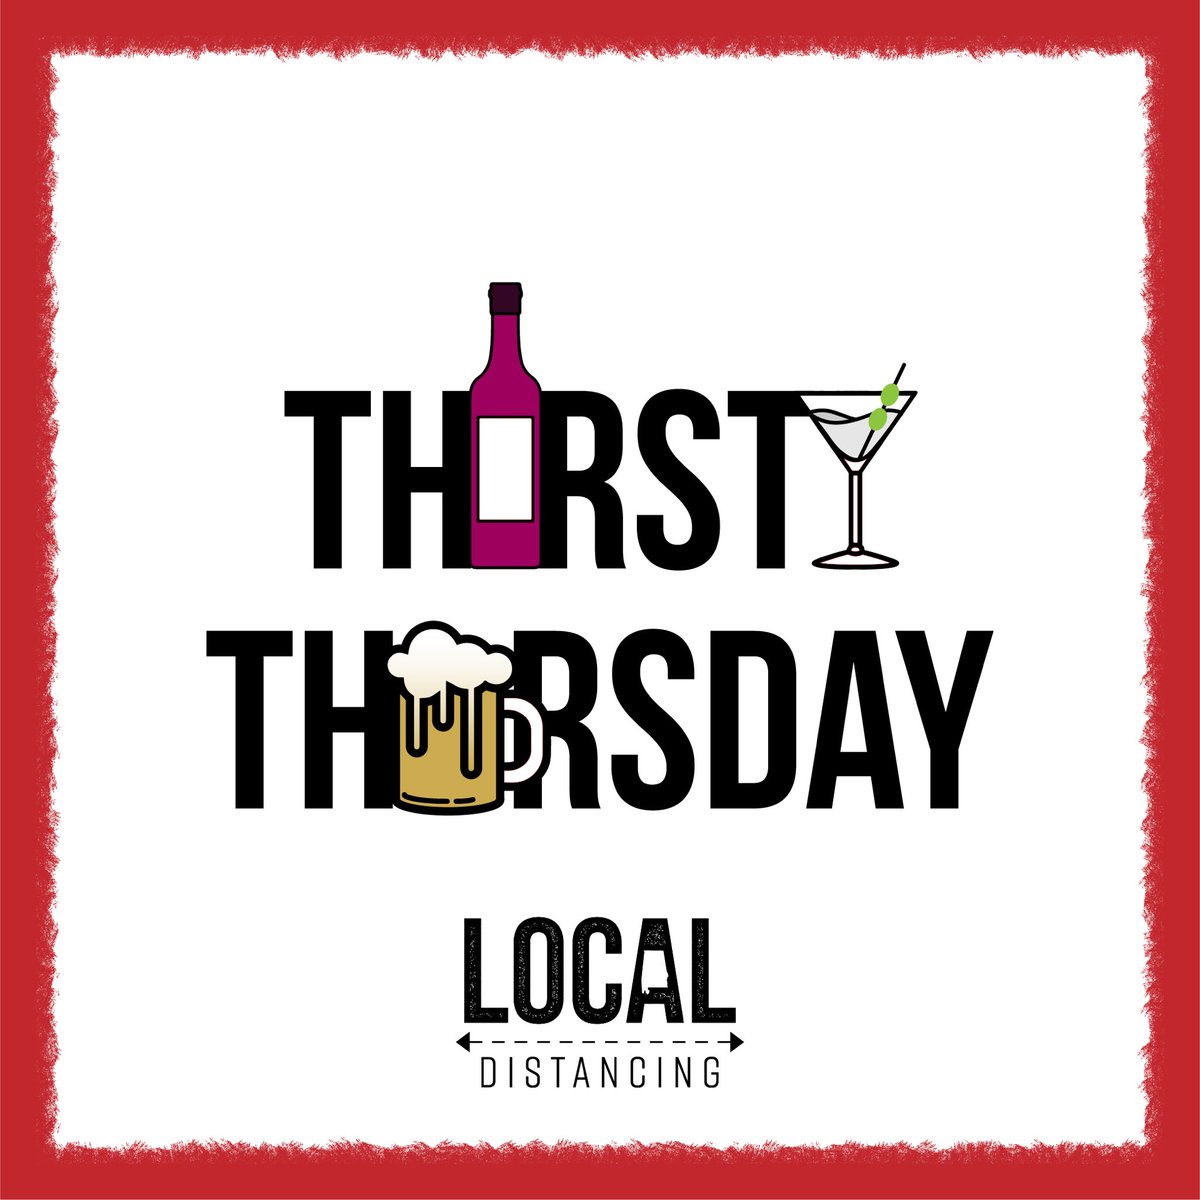 Raise your glass, Bham! Thirsty Thursday is here! Grab a drink at one of the many bars & restaurants serving curbside and tag us (and go straight home). Let’s party like it’s 2019! #thirstythursday  #supportlocal #washyourhands #6ftplease #donttouchyourface